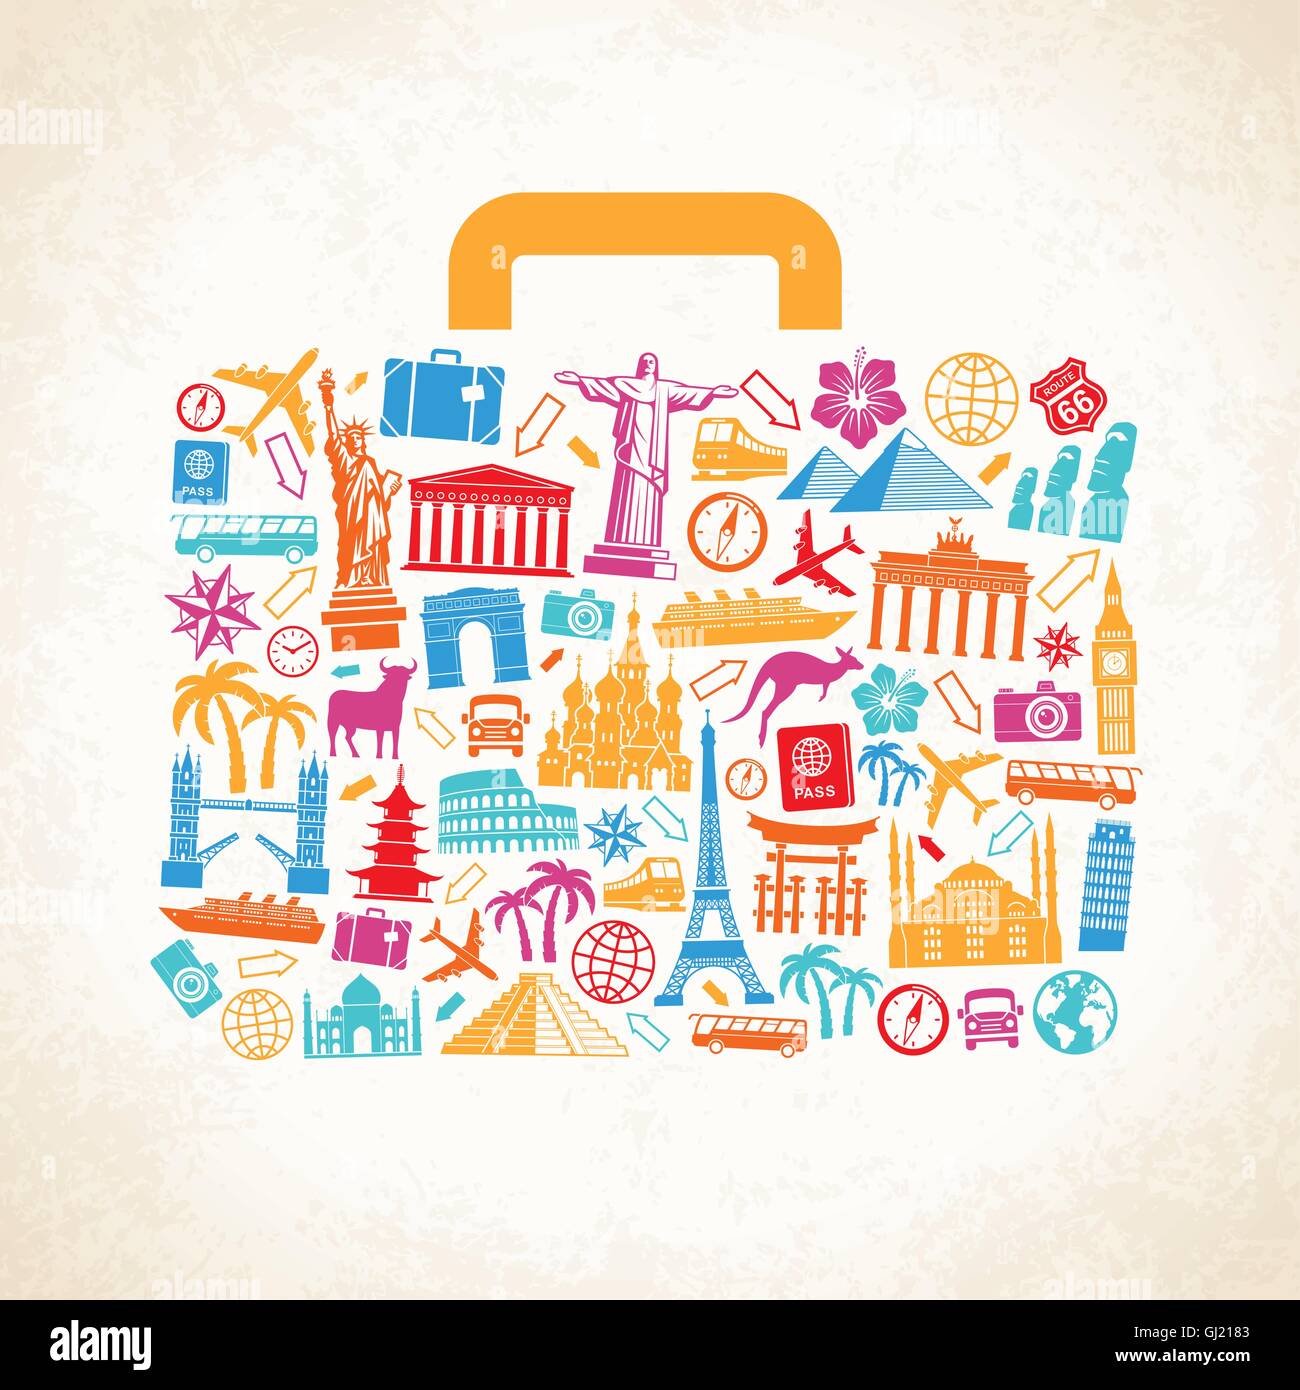 Travel luggage concept composed of travel related and famous monuments icons on a grunge background. Stock Vector